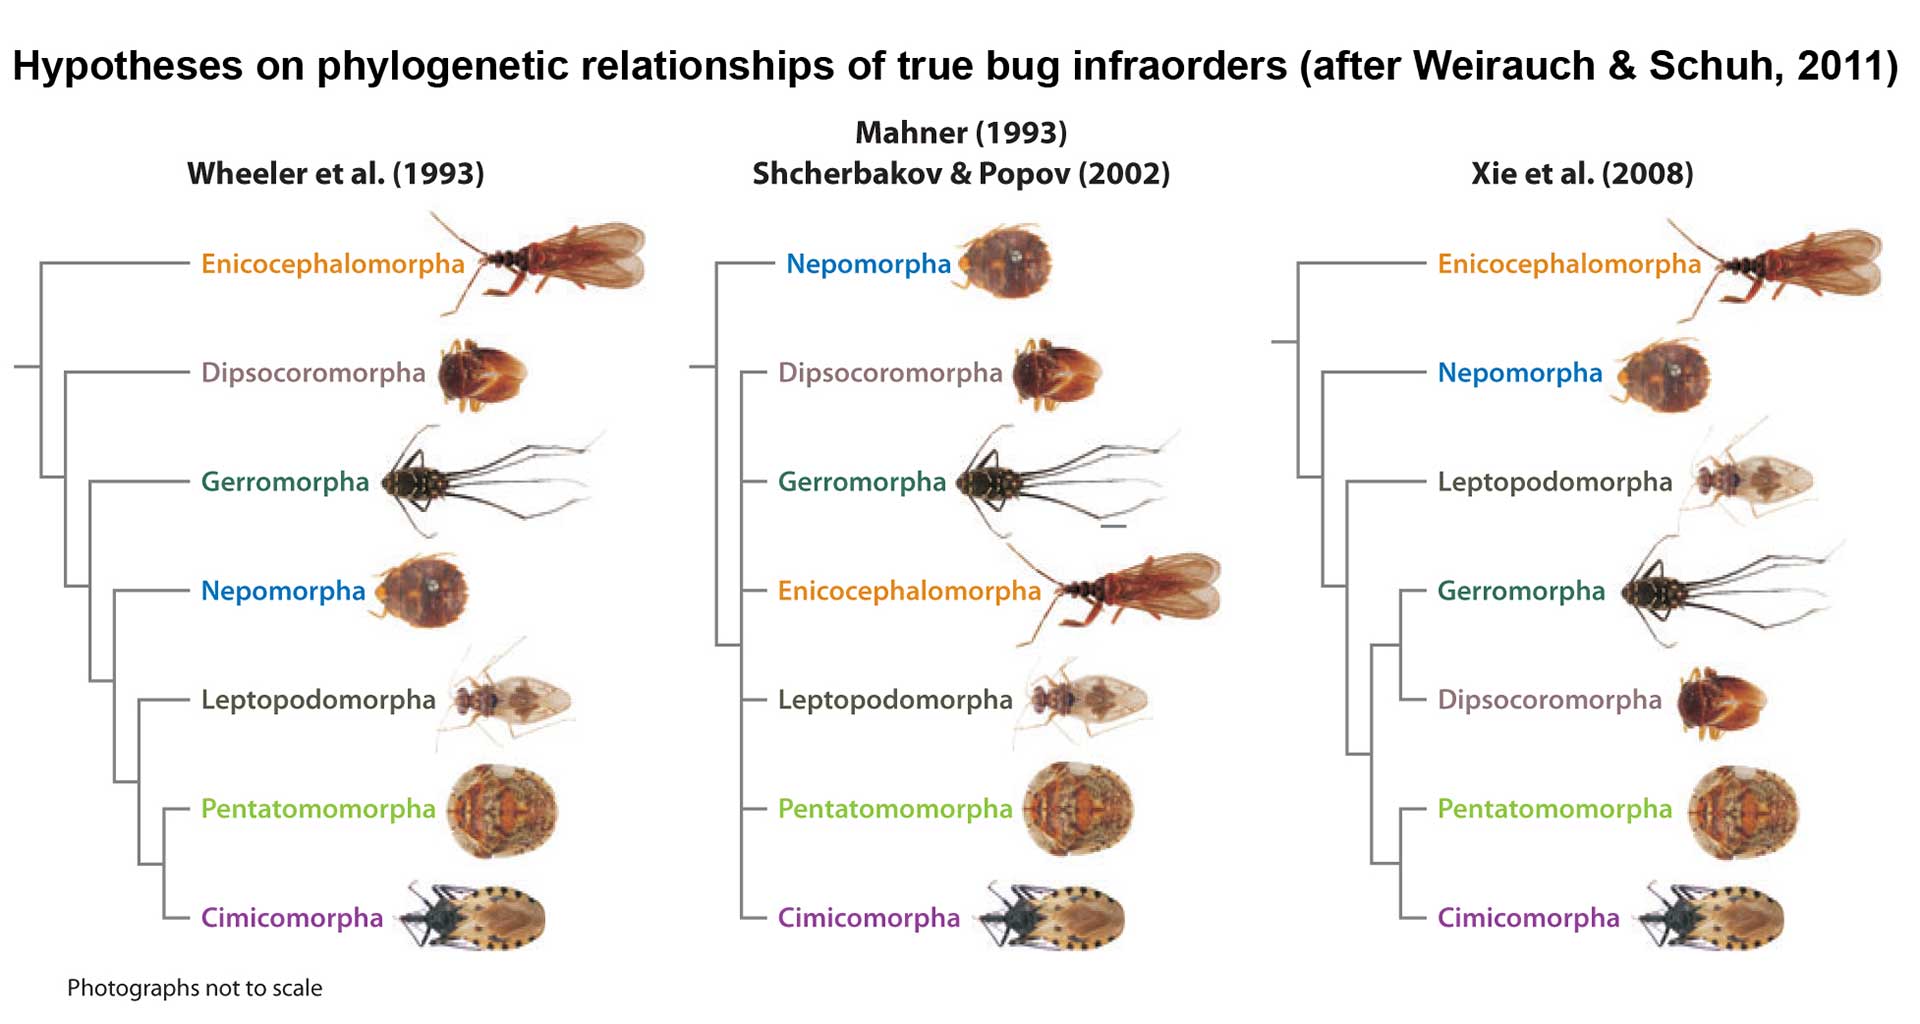 Hypotheses on phylogenic relationships of true bug infraorders